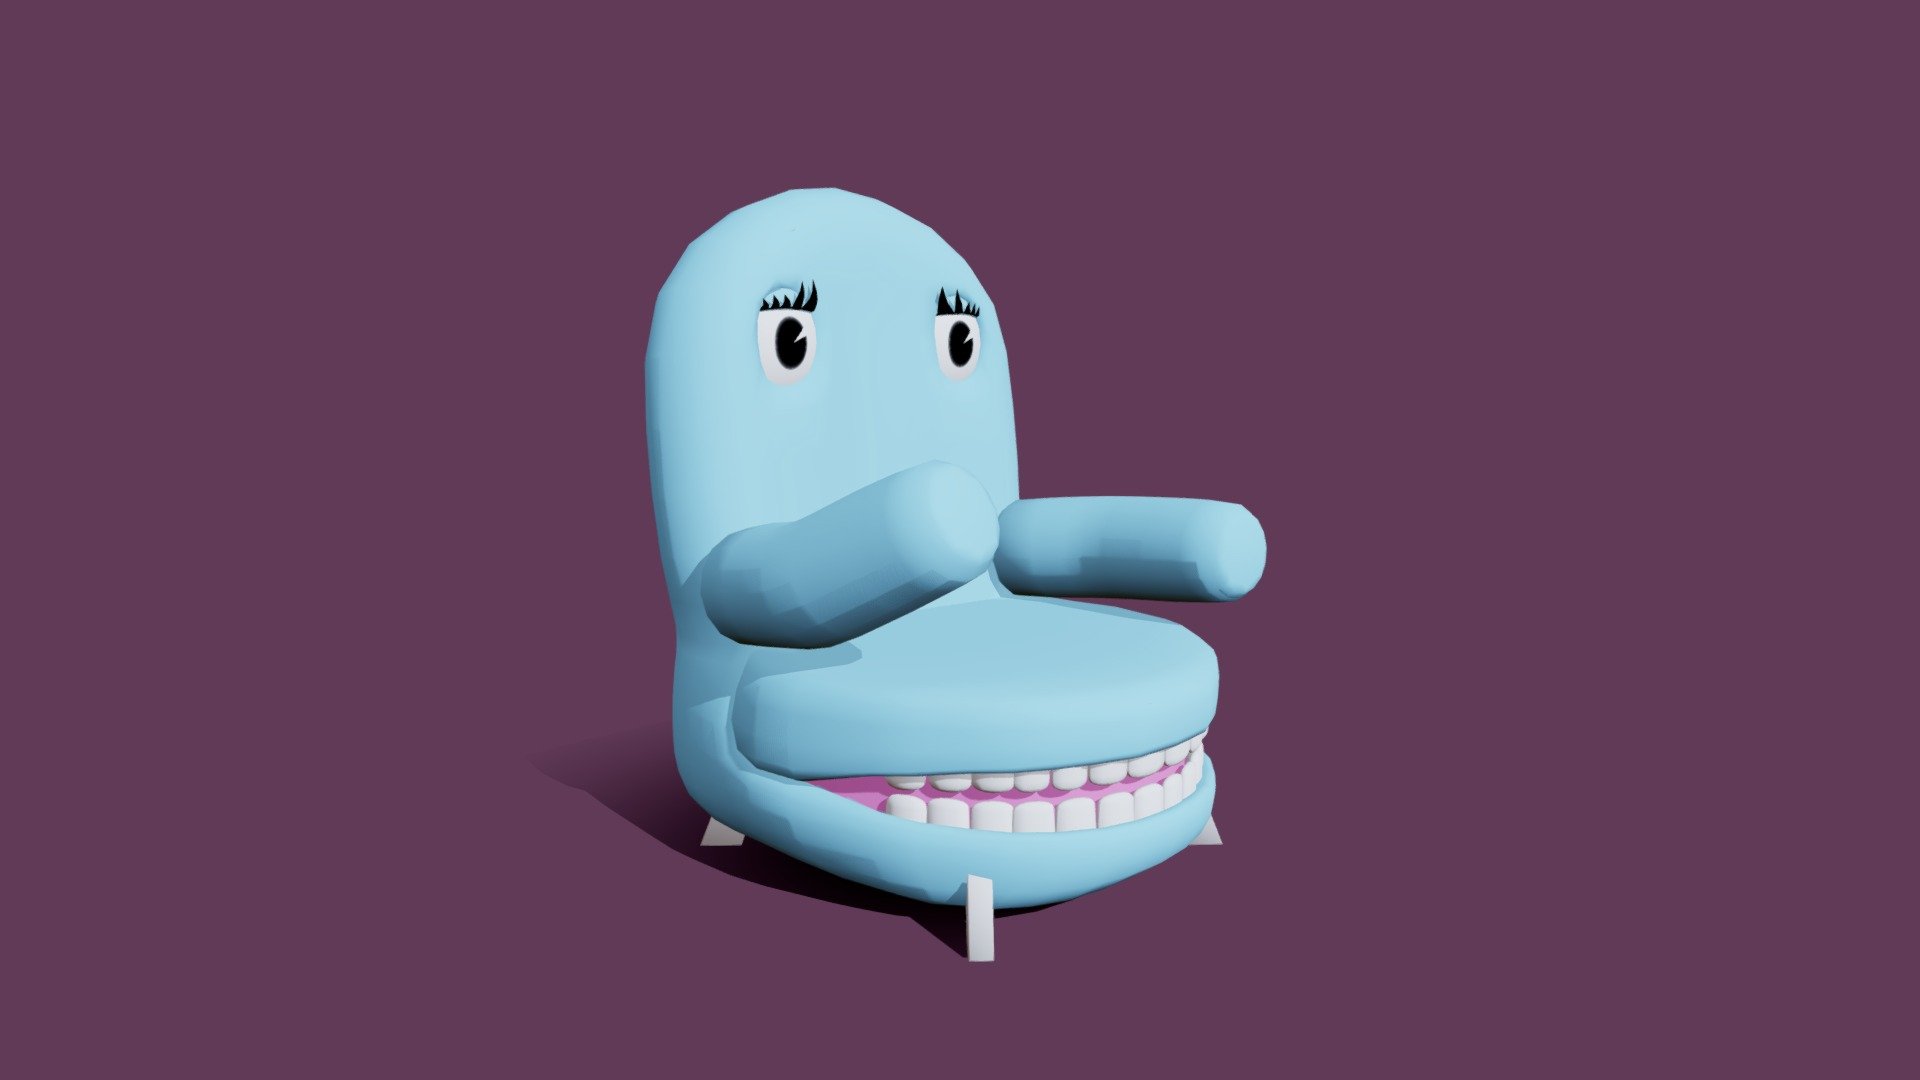 Chairy from Pee-wee's Playhouse.

Pee-wee's living-room chair &amp; friend 3d model